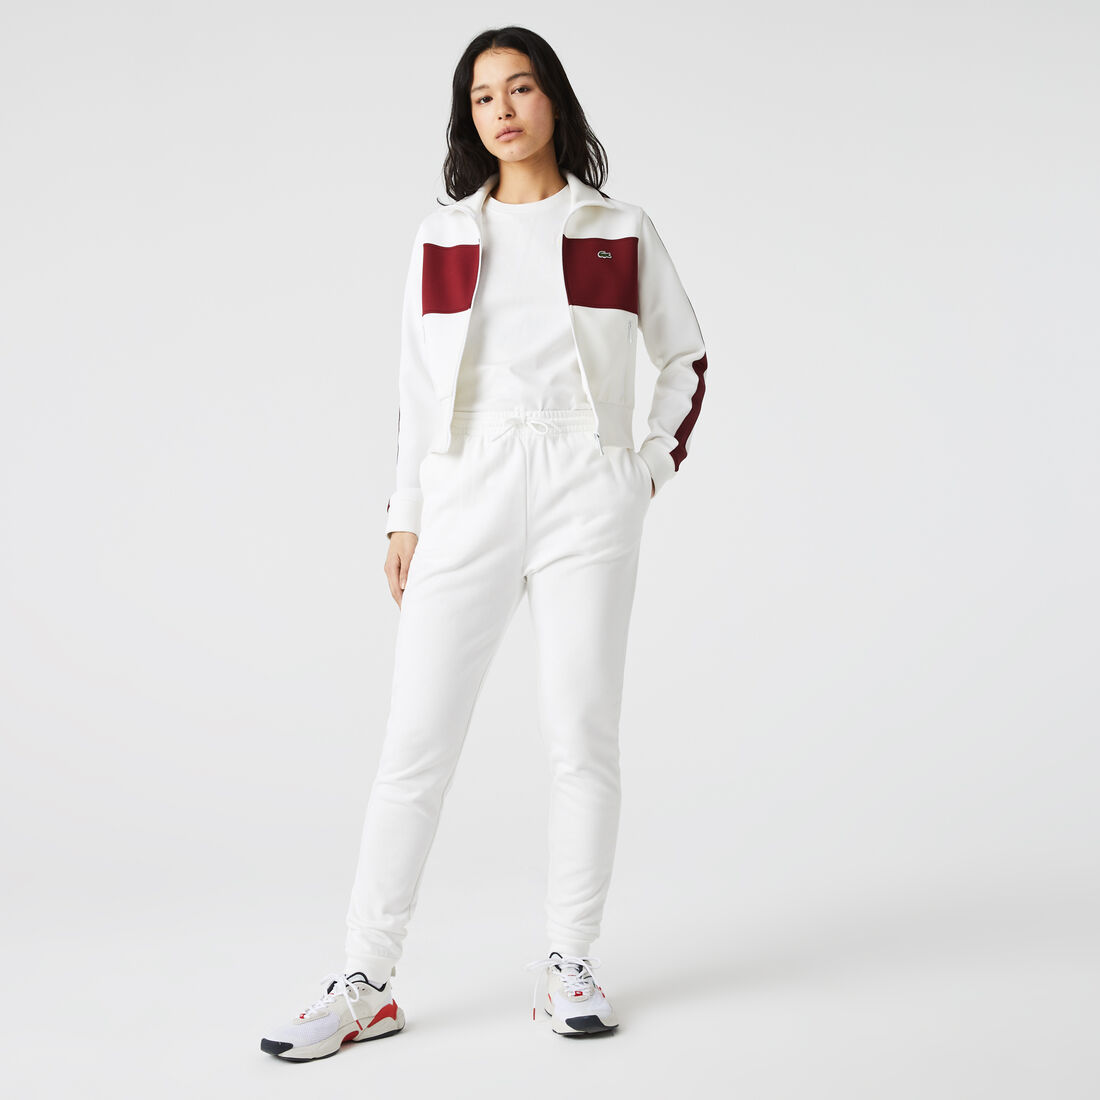 Lacoste Pants Clearance - Online USA Lacoste